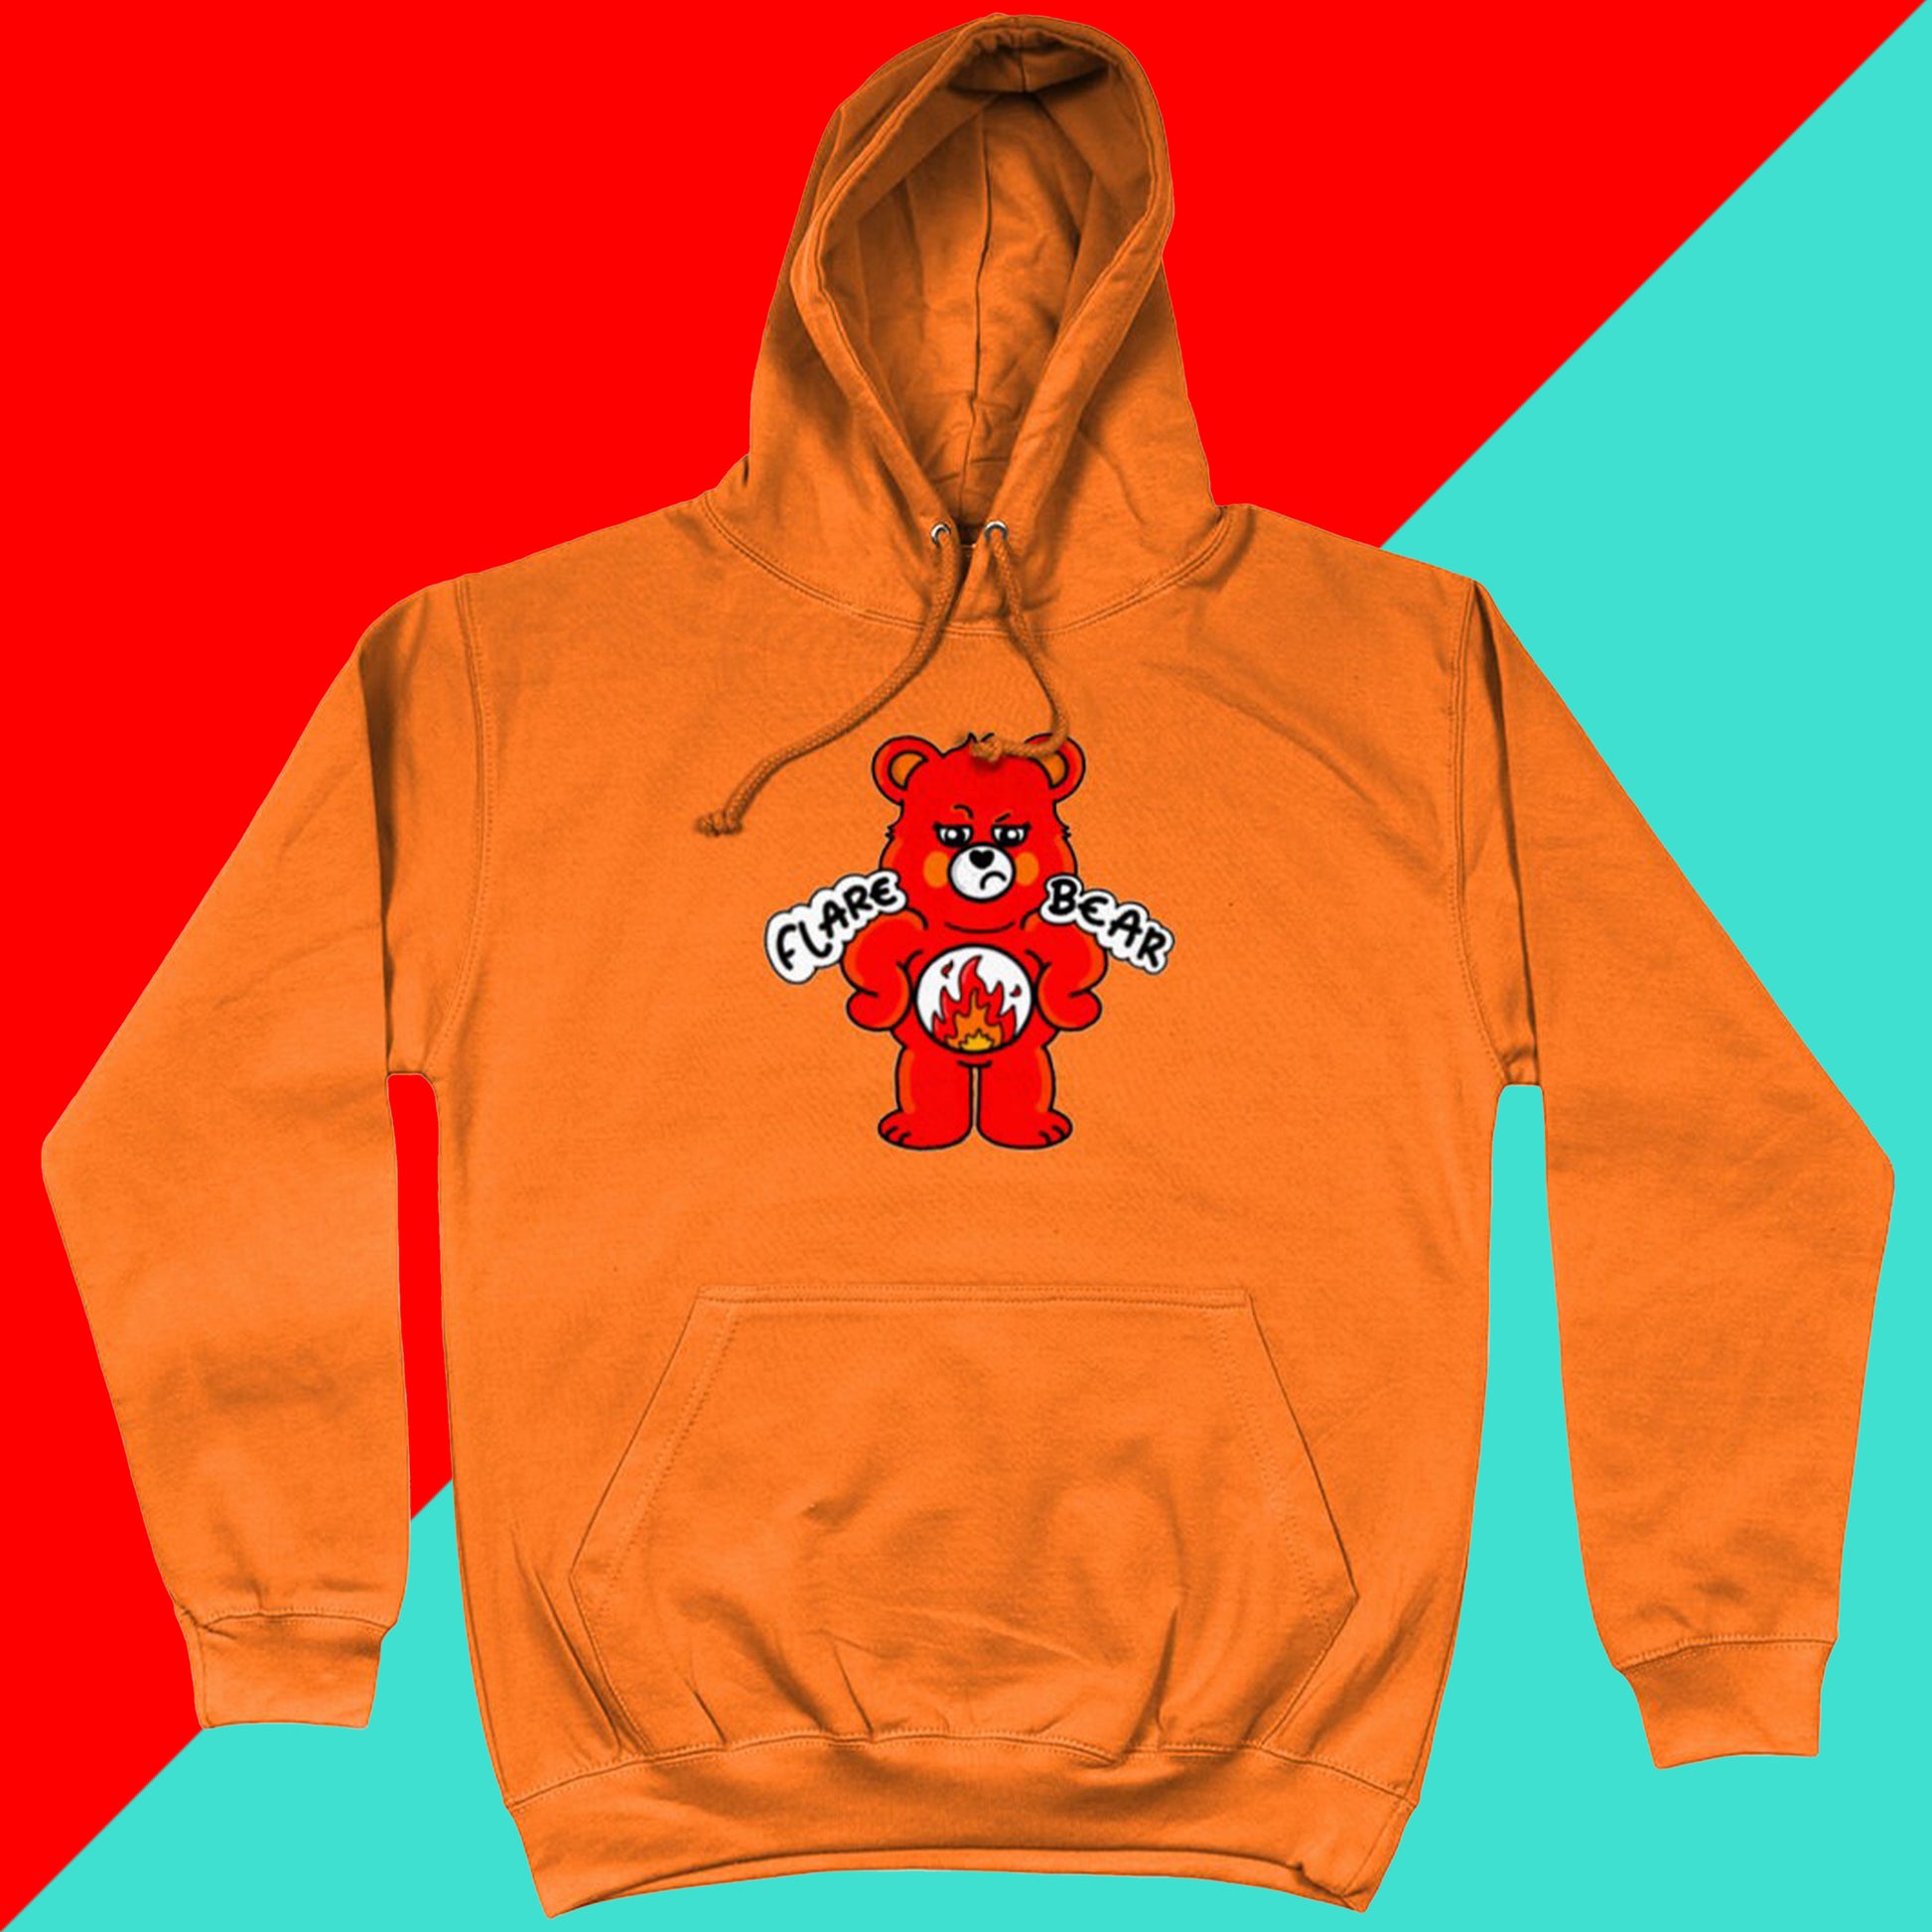 Flare Bear hoodie jumper in orange crush shown on a red and blue background. The hoodie is of a red bear with a fed up expression and hands on its hips. There is a white circle on its belly with flames inside. Flare Bear is written on the hoodie. The hoodie is designed to raise awareness for chronic illness flare ups.